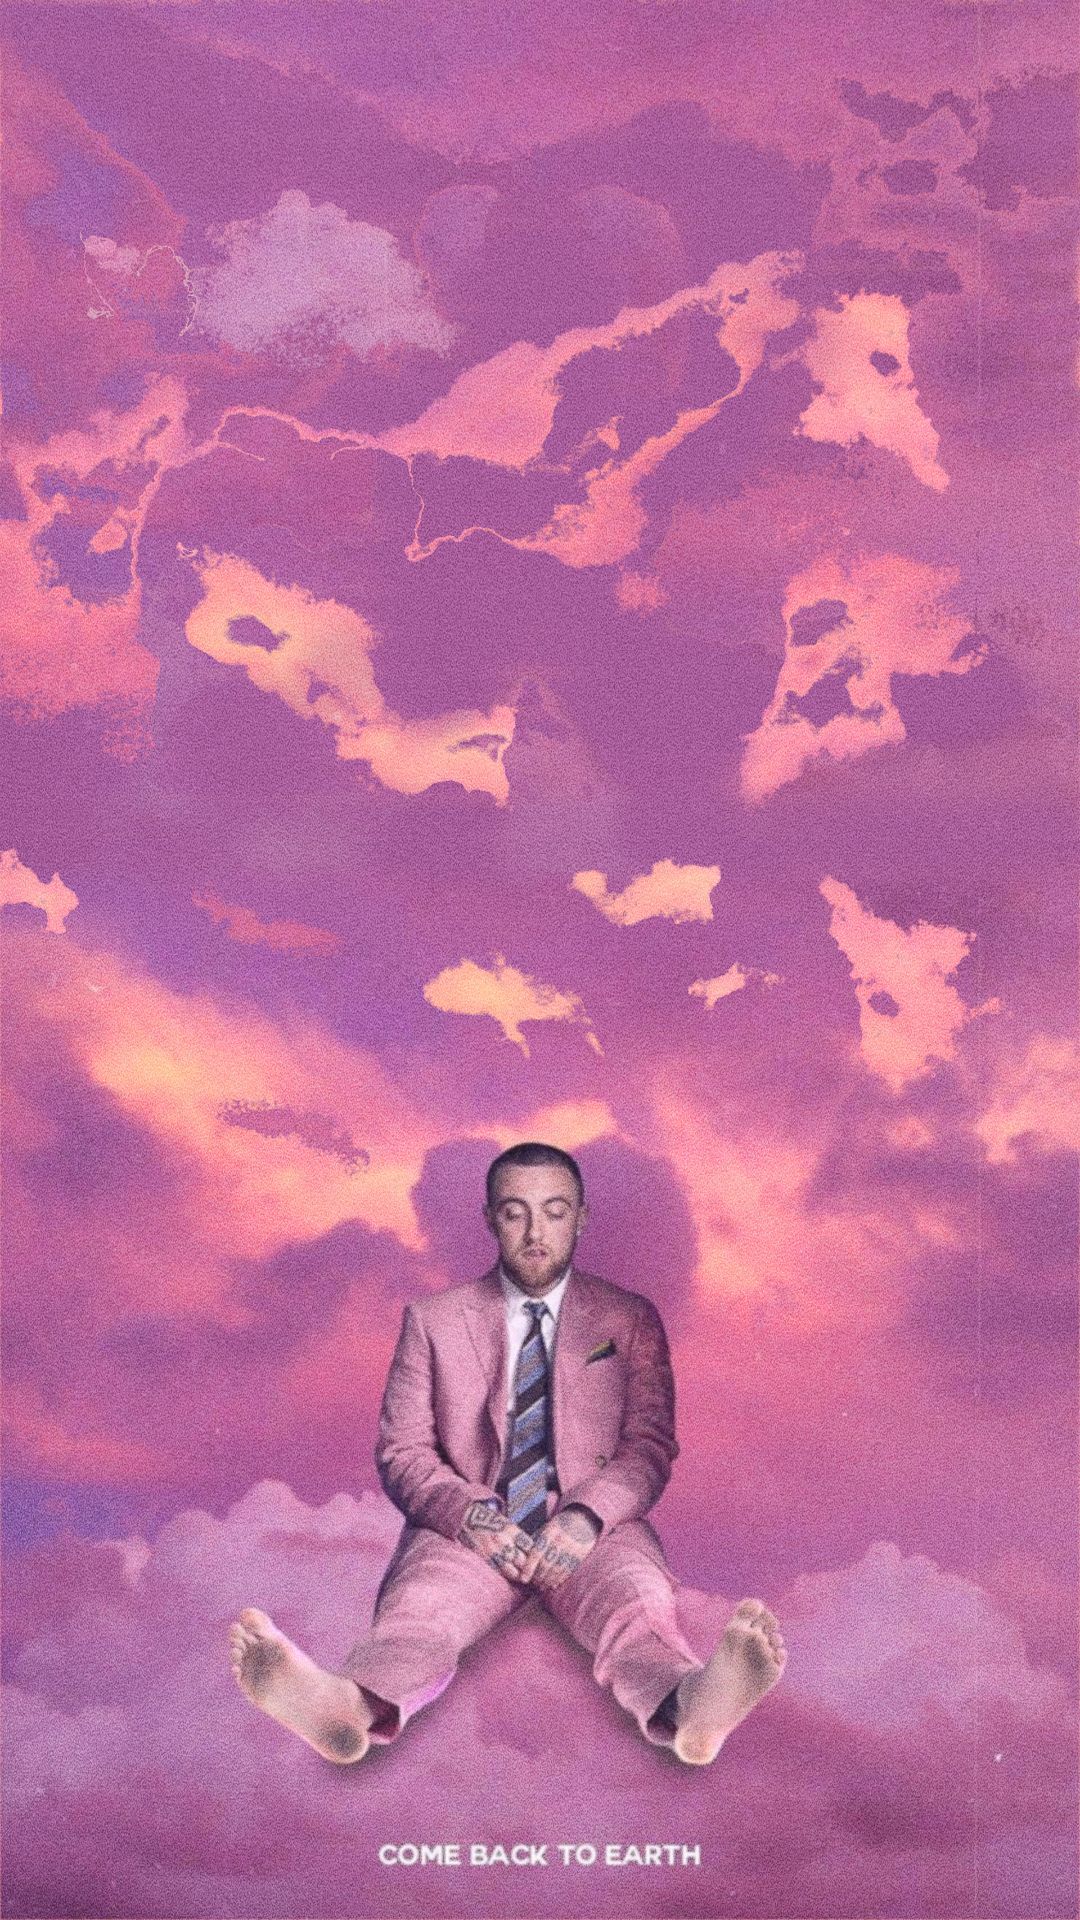 As requested: Mac Miller (1080x i tried my best)